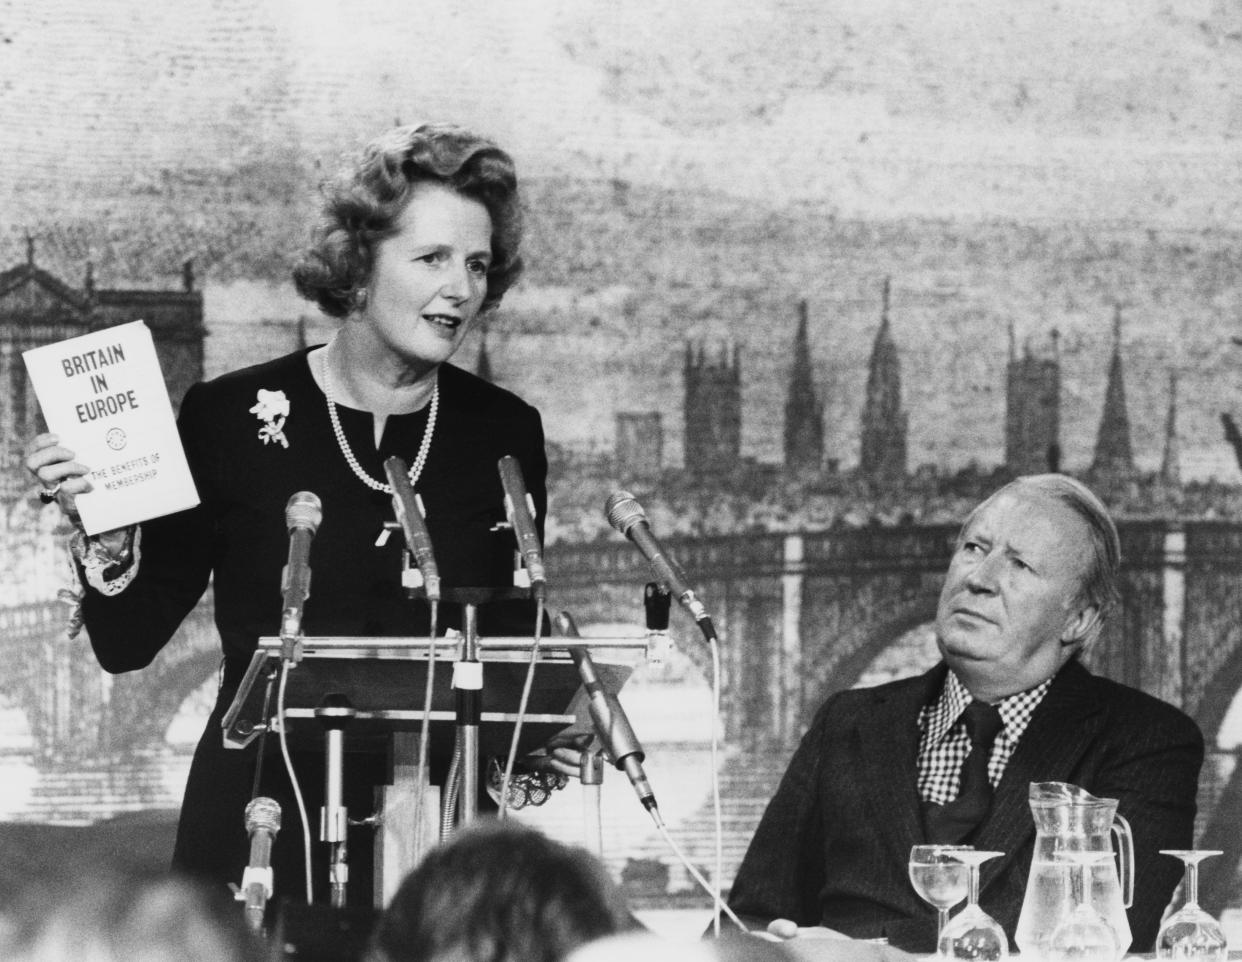 Margaret Thatcher speaks during the Conservative Party’s campaign to keep Britain in the Common Market, watched by her predecessor, Edward Heath, on May 17, 1975. (Photo: Central Press/Hulton Archive/Getty Images)